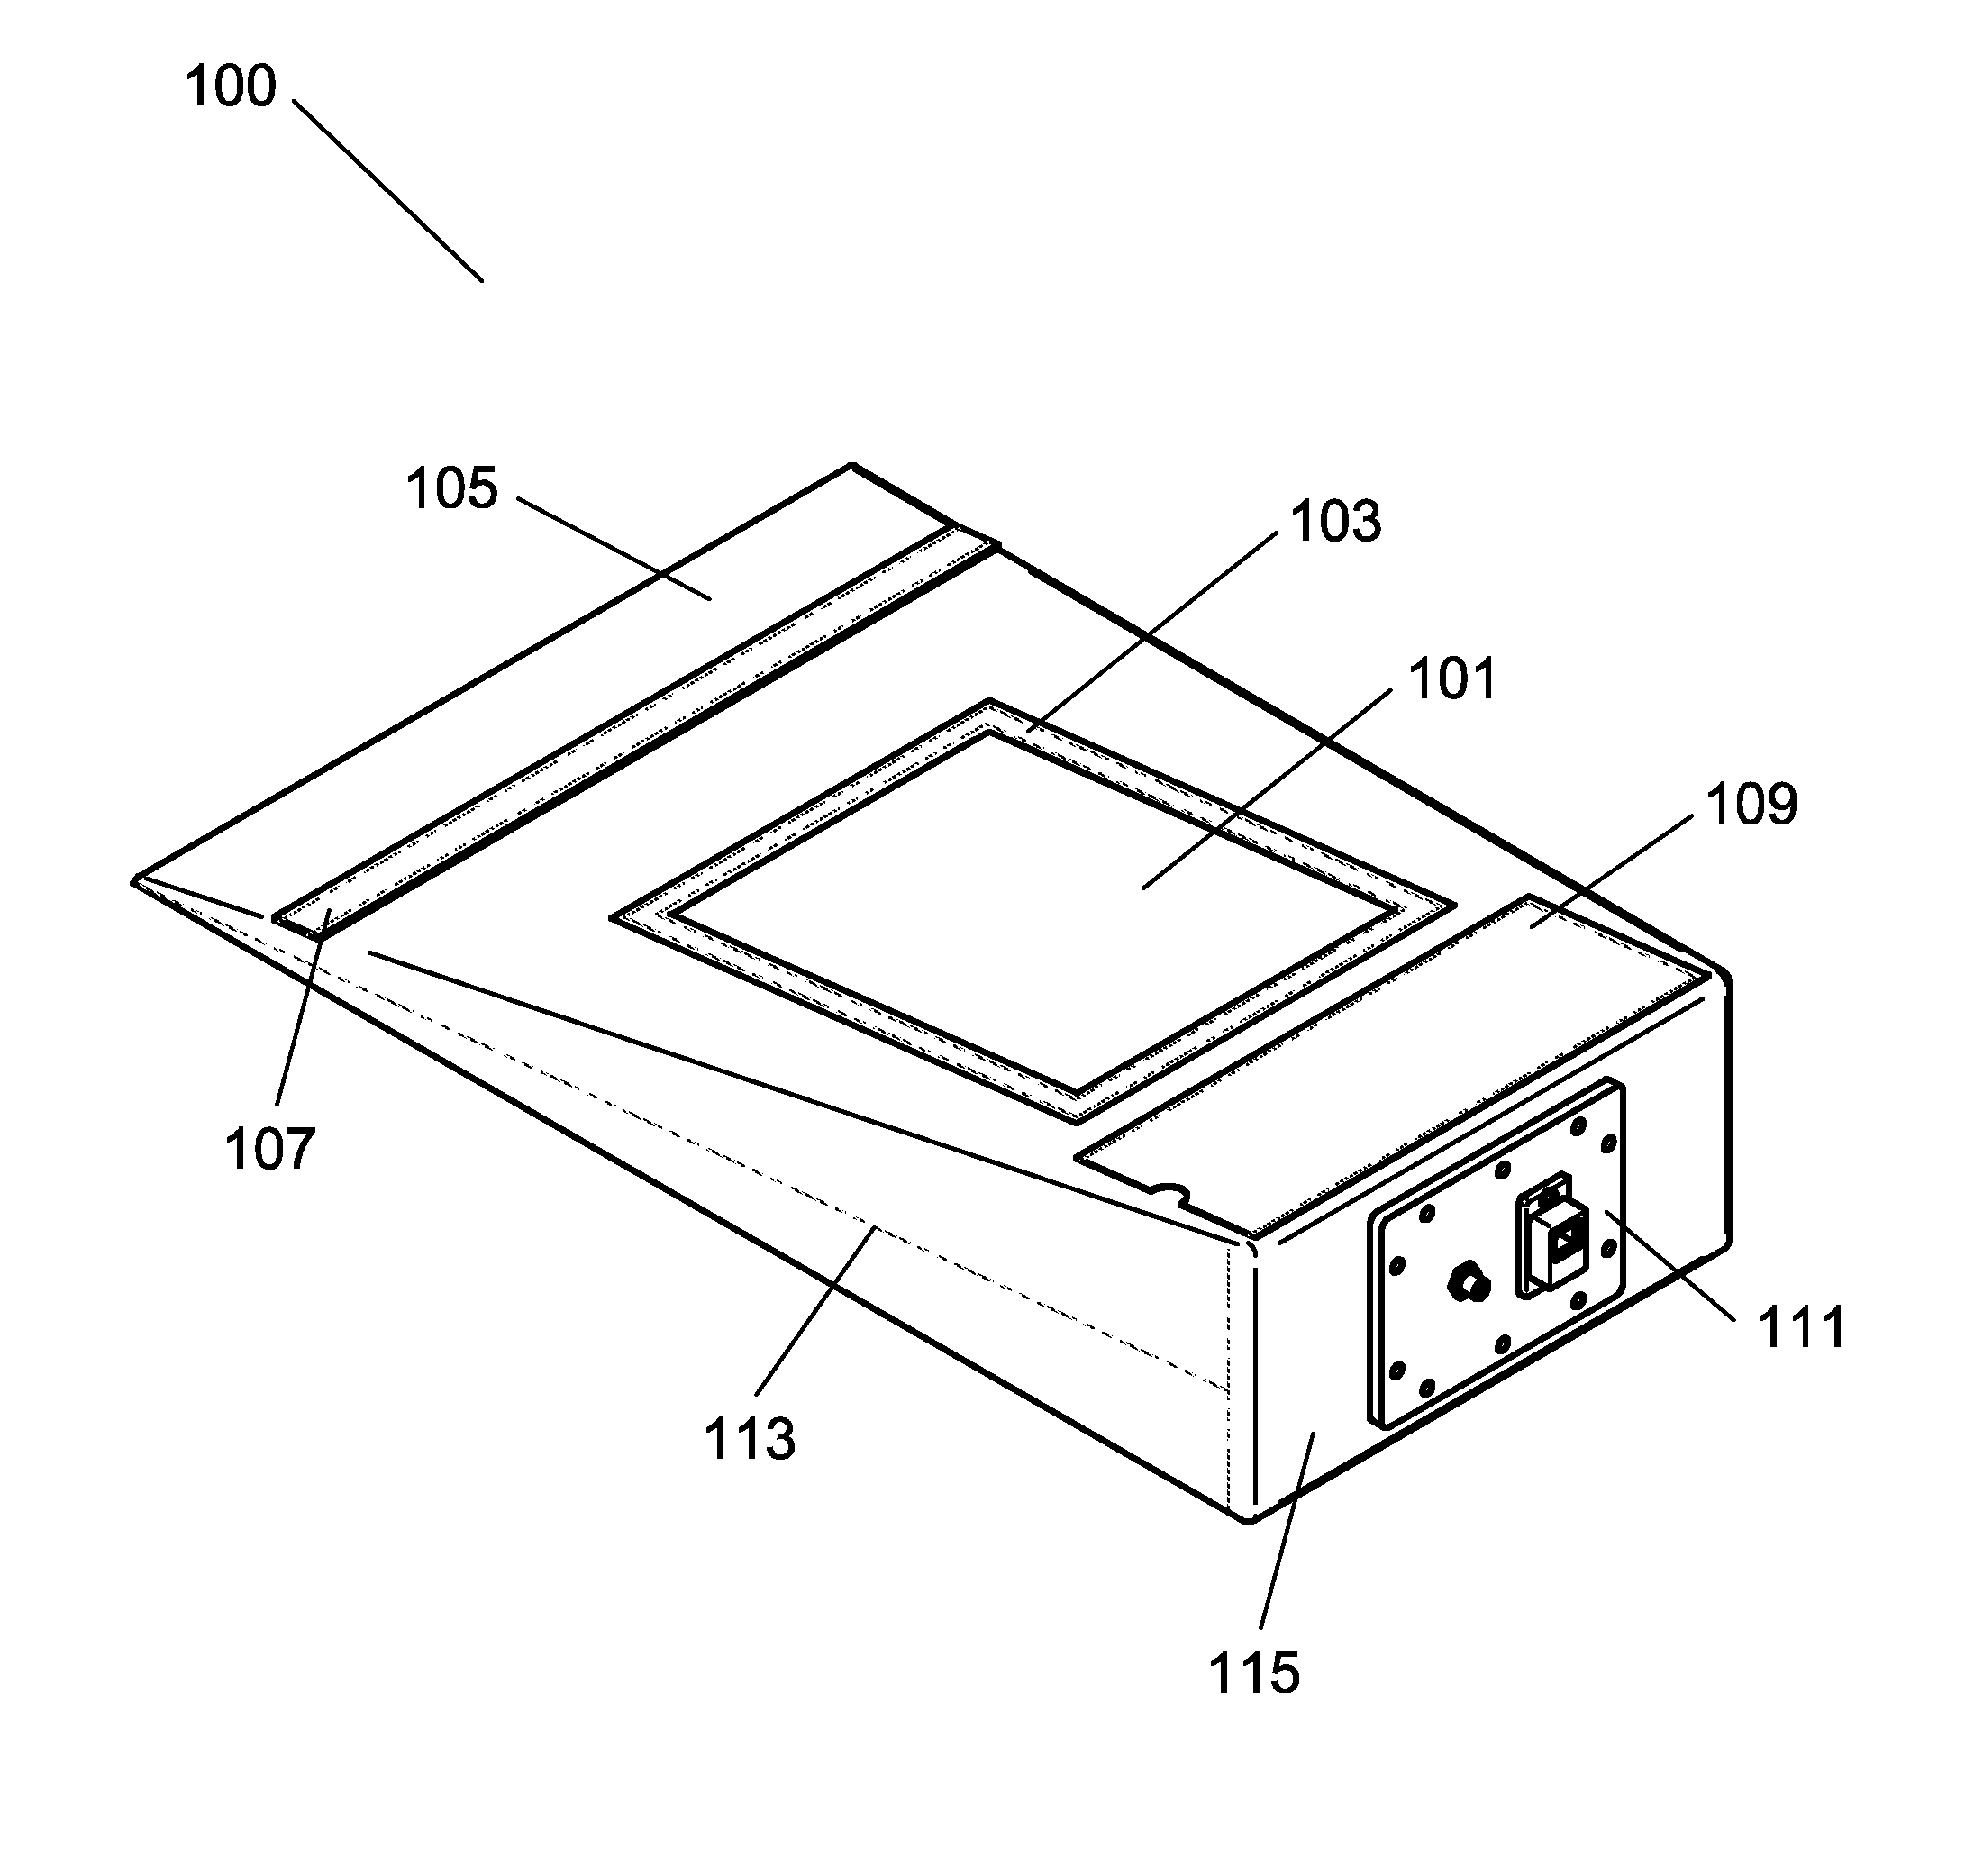 Electromagnetically shielded enclosure with operable interfaces